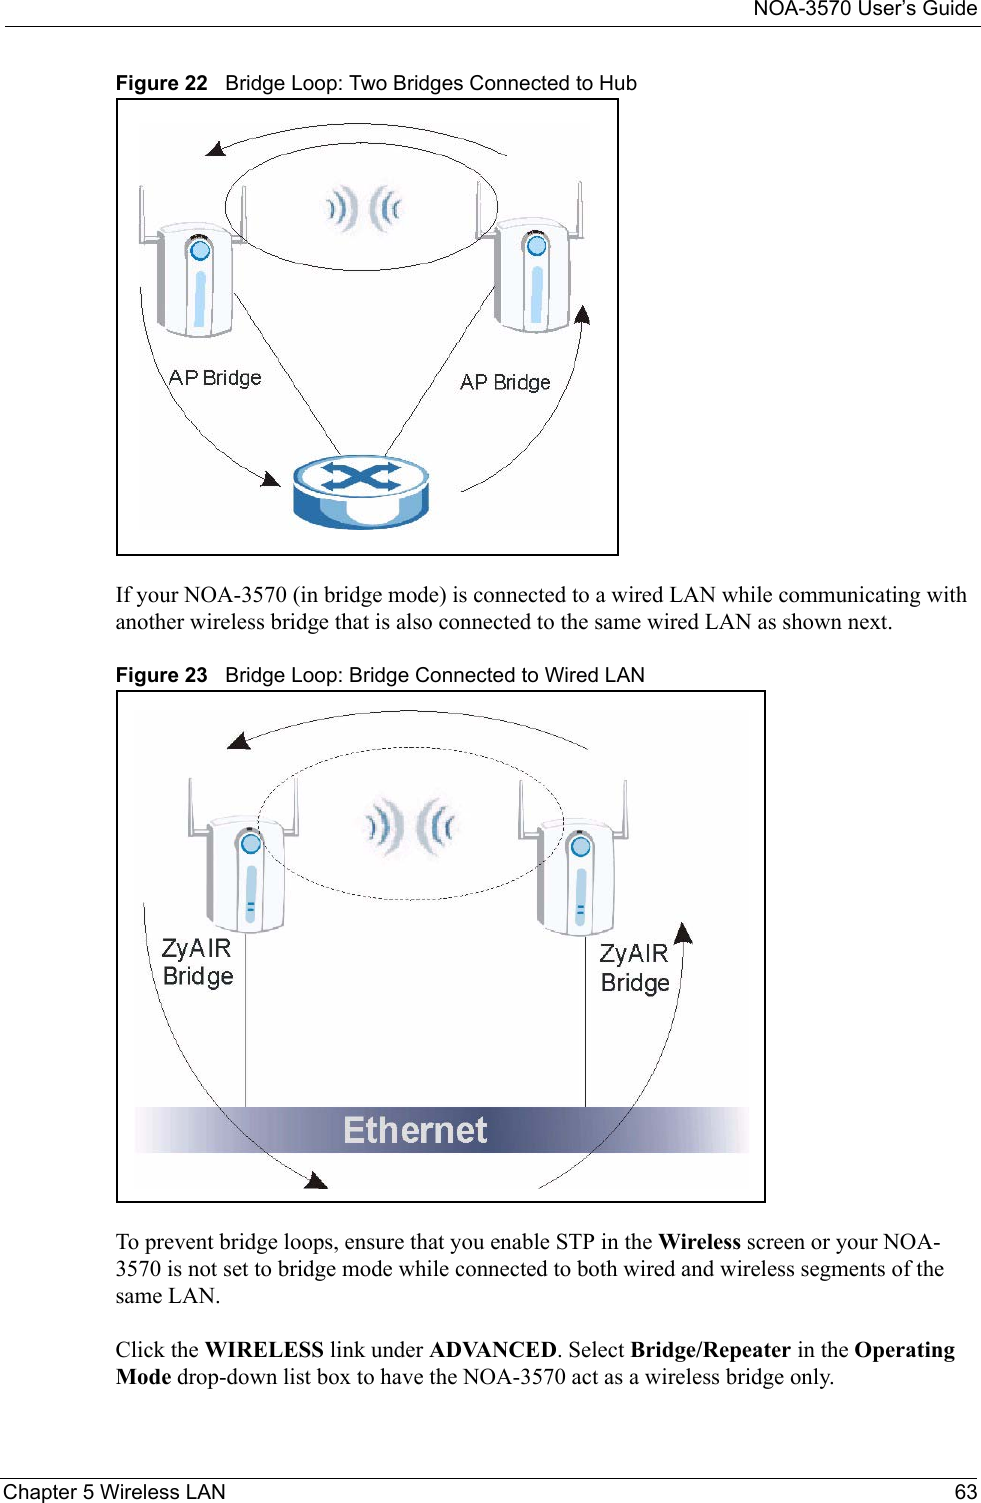 NOA-3570 User’s GuideChapter 5 Wireless LAN 63Figure 22   Bridge Loop: Two Bridges Connected to HubIf your NOA-3570 (in bridge mode) is connected to a wired LAN while communicating with another wireless bridge that is also connected to the same wired LAN as shown next.Figure 23   Bridge Loop: Bridge Connected to Wired LANTo prevent bridge loops, ensure that you enable STP in the Wireless screen or your NOA-3570 is not set to bridge mode while connected to both wired and wireless segments of the same LAN.Click the WIRELESS link under ADVANCED. Select Bridge/Repeater in the Operating Mode drop-down list box to have the NOA-3570 act as a wireless bridge only.